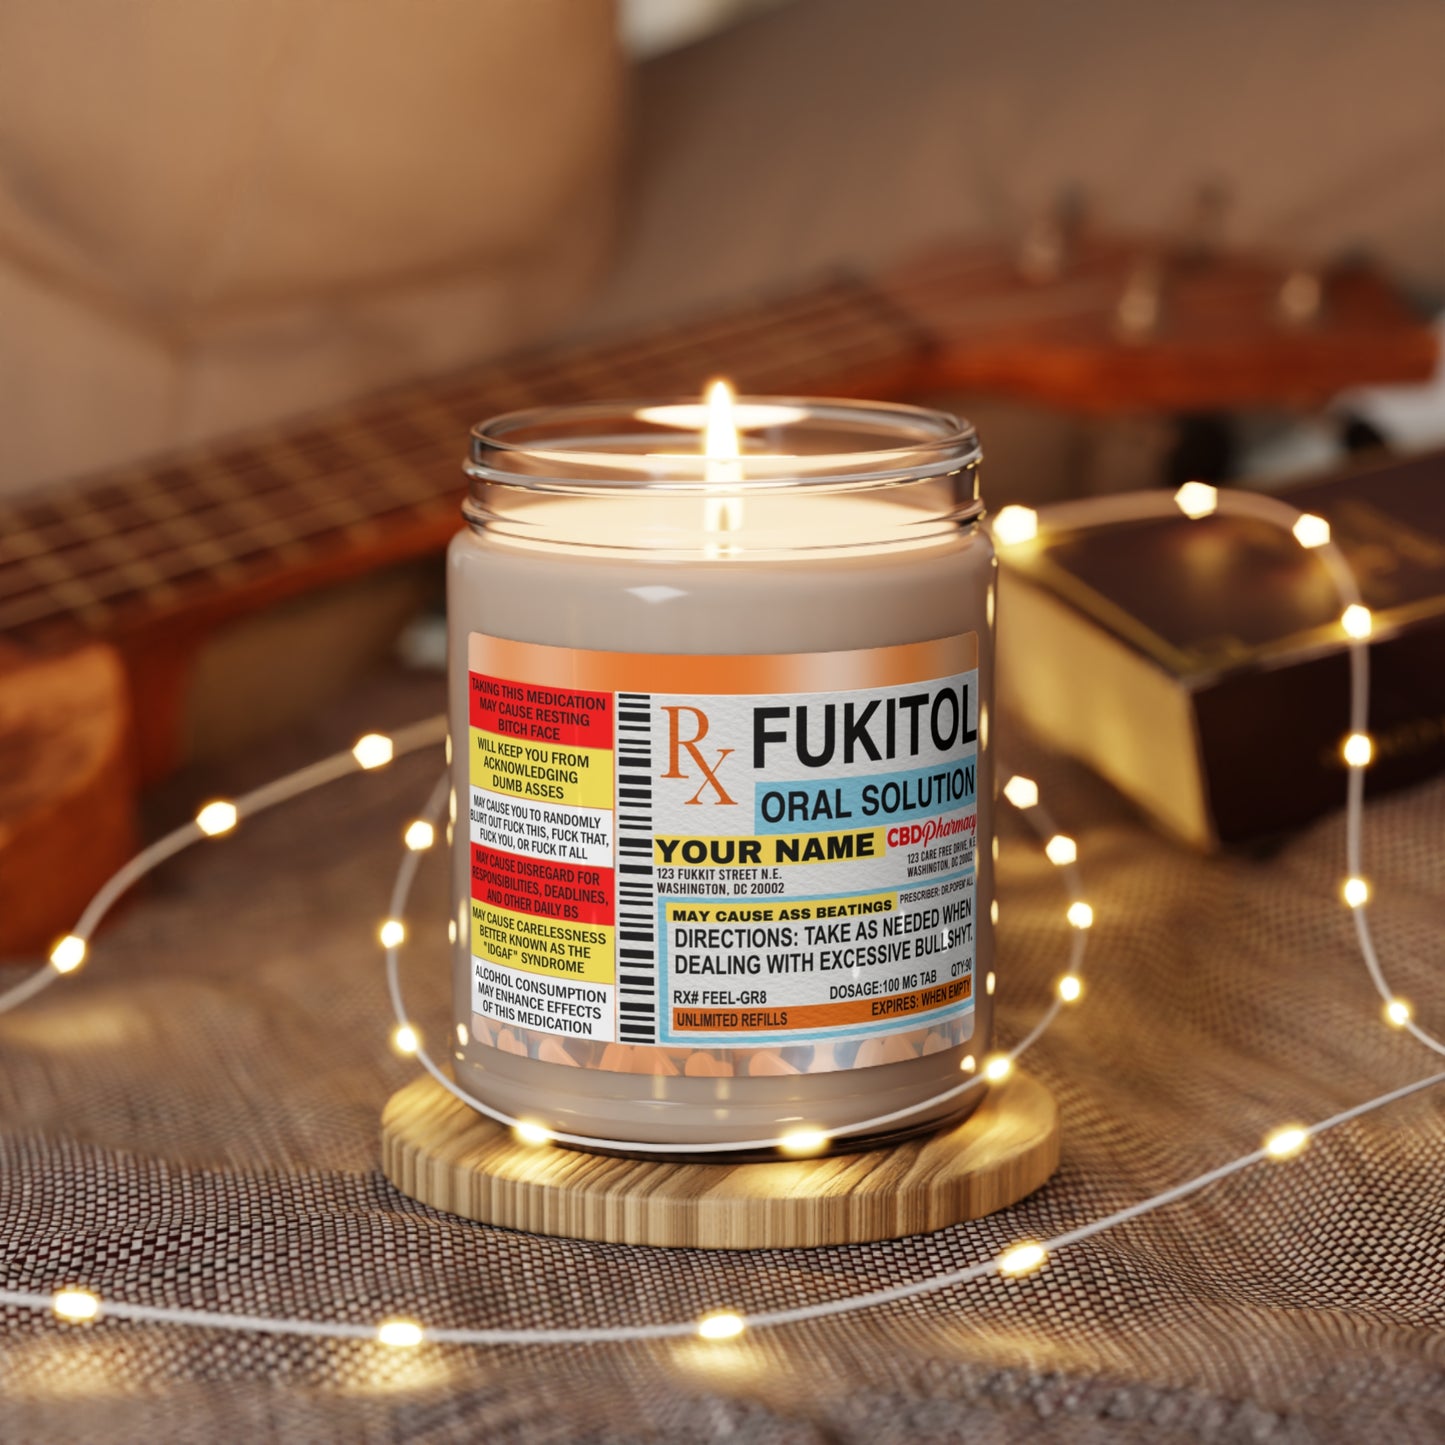 Personalized Fukitol Scented Soy Candle Quirky Saying| Funny Sayings on 9oz Scented Candles| Sassy Meme Funny Candle|Parody Perfect Gift